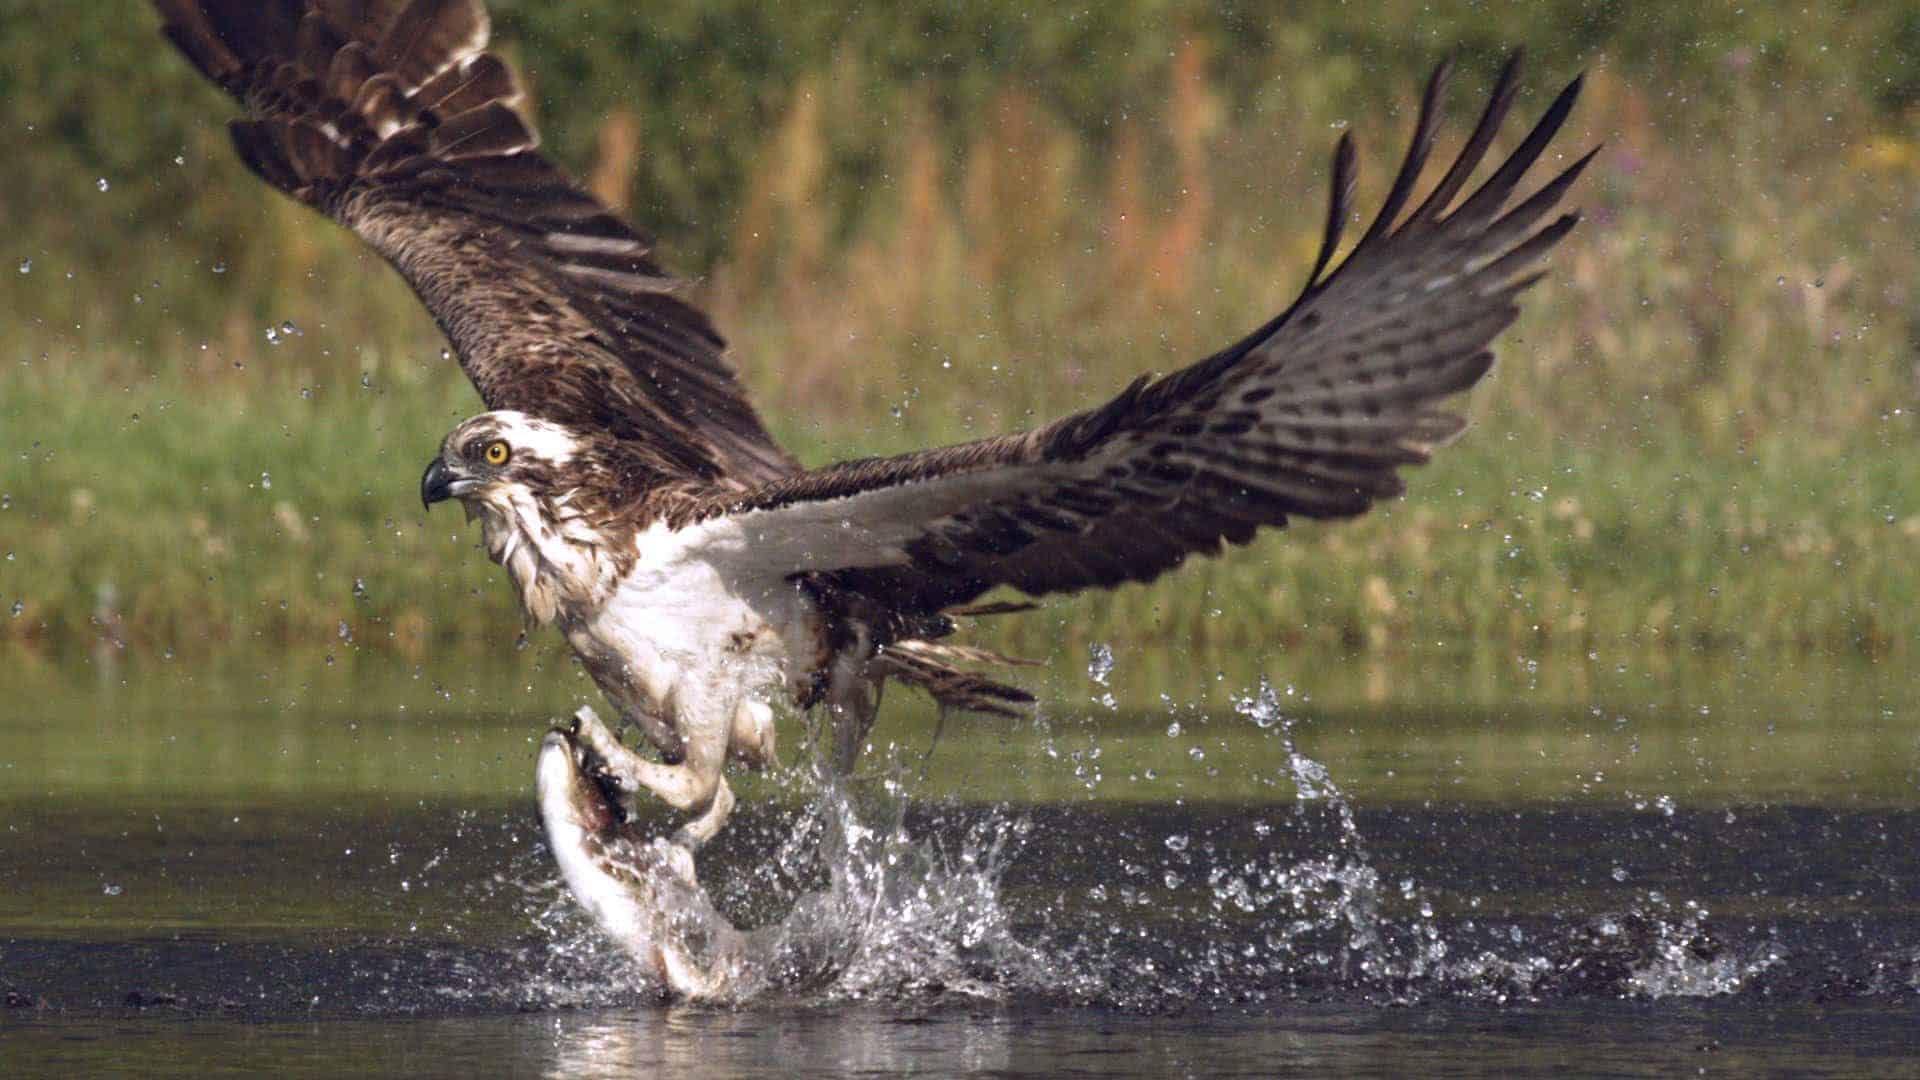 Osprey hunting in slow motion